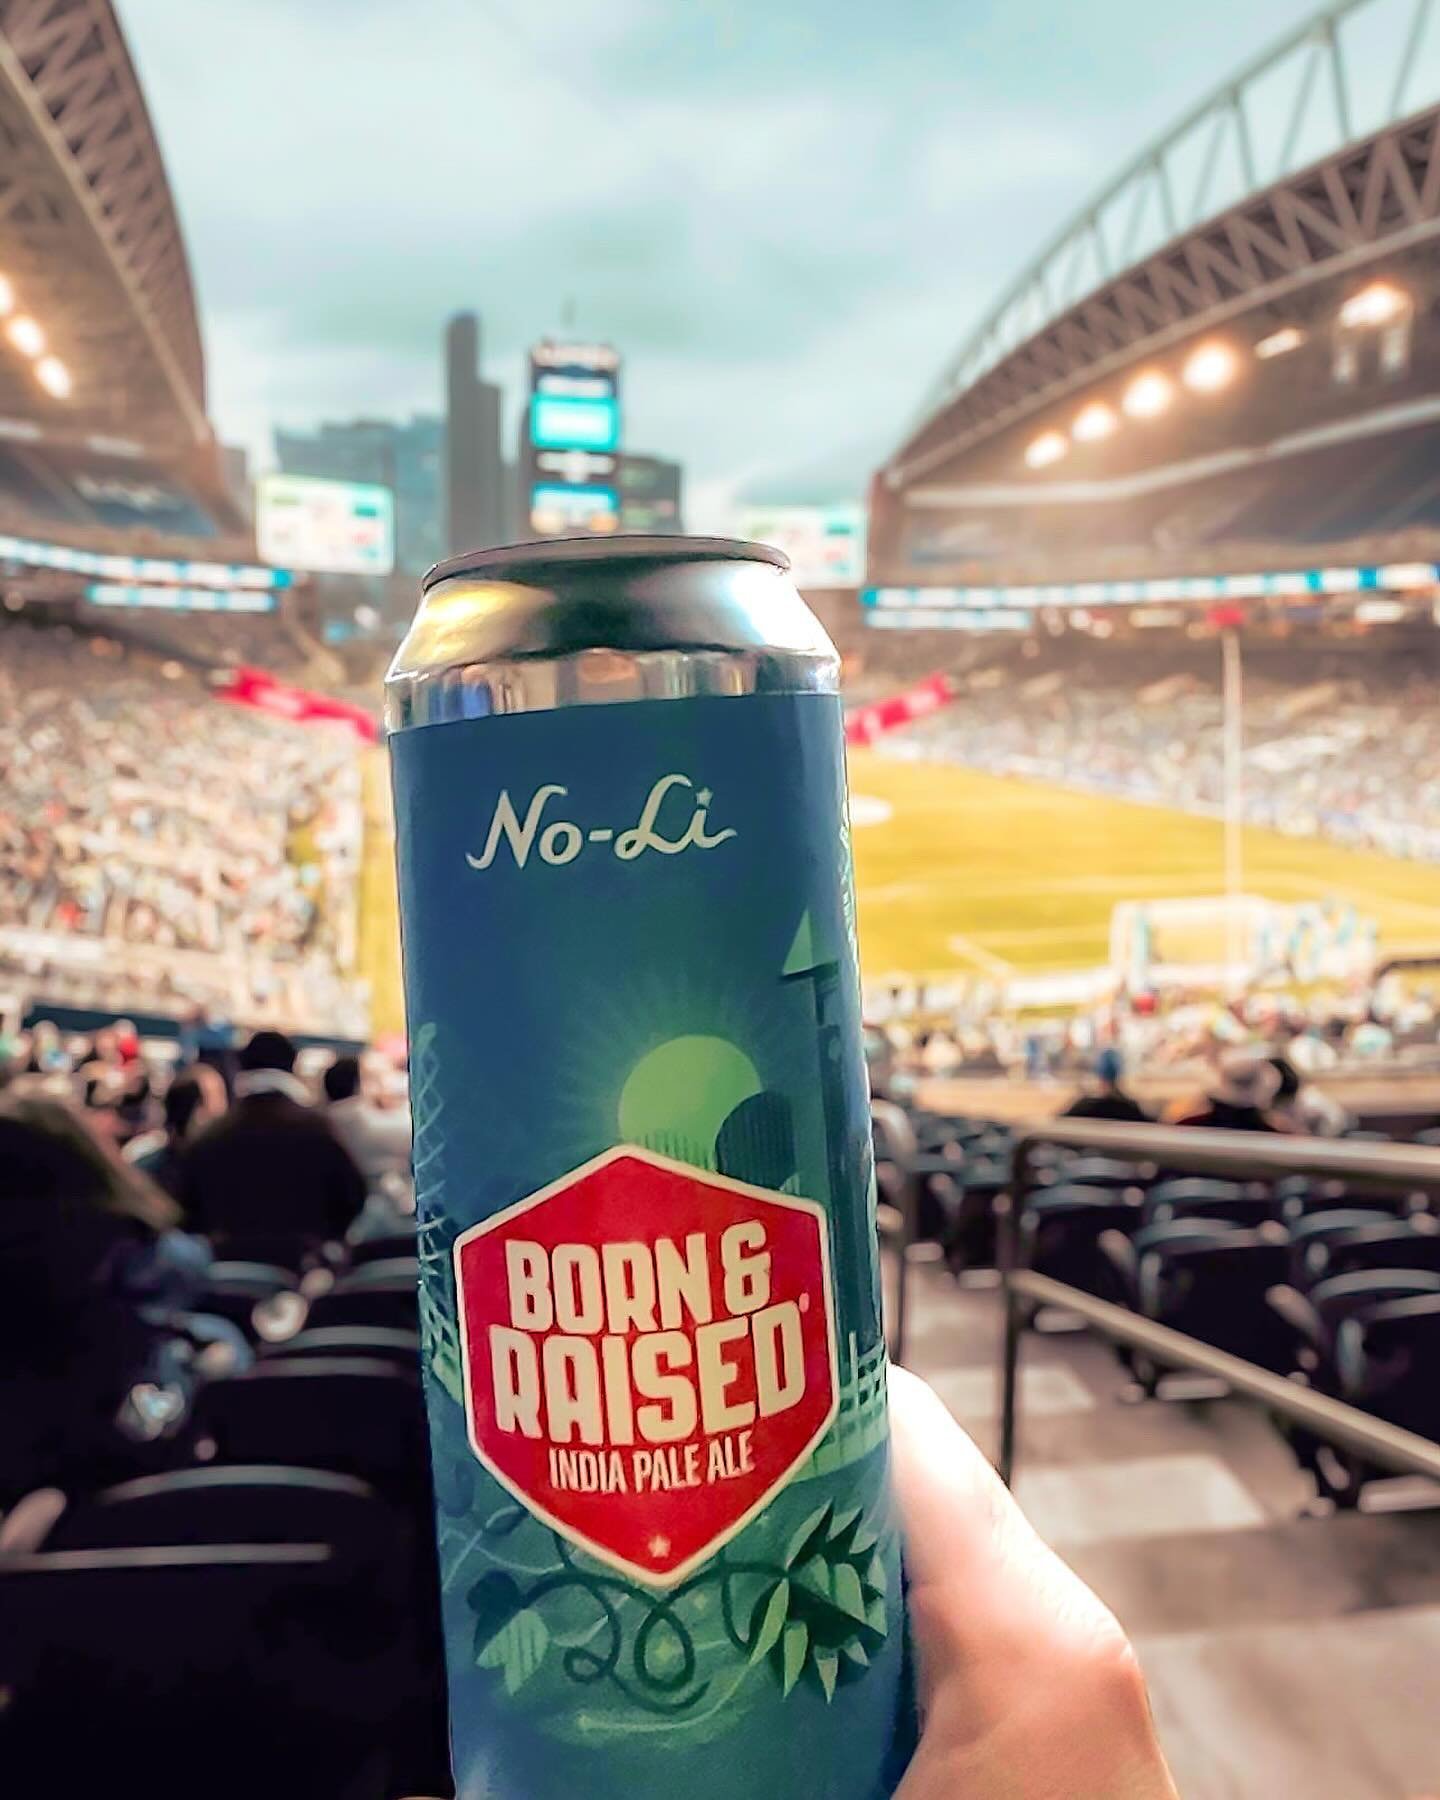 Born &amp; Raised 19.2s NOW AVAILABLE at Lumen Field for Sounders FC matches! 

Enjoy a tall boy at the match this Saturday vs Vancouver!

Cascade Fog Draft in sections 128, 209 &amp; 325!